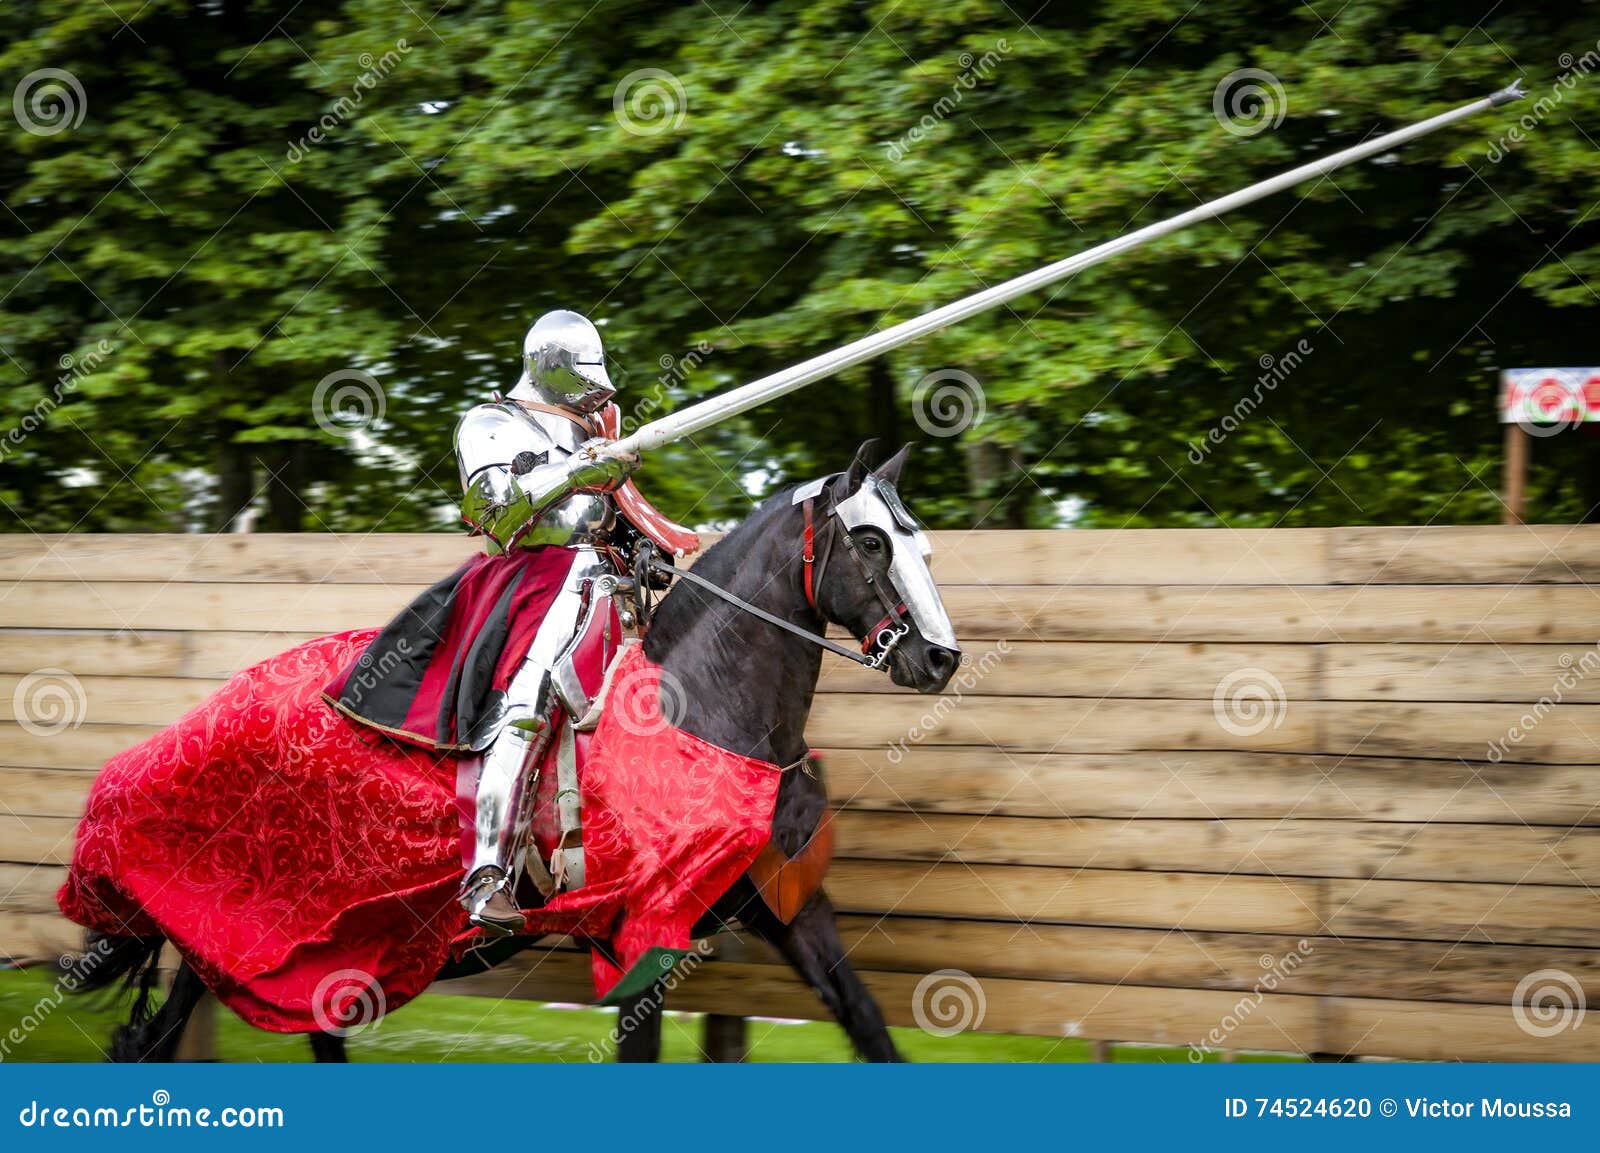 Why Some People Almost Always Save Money With knight jousting